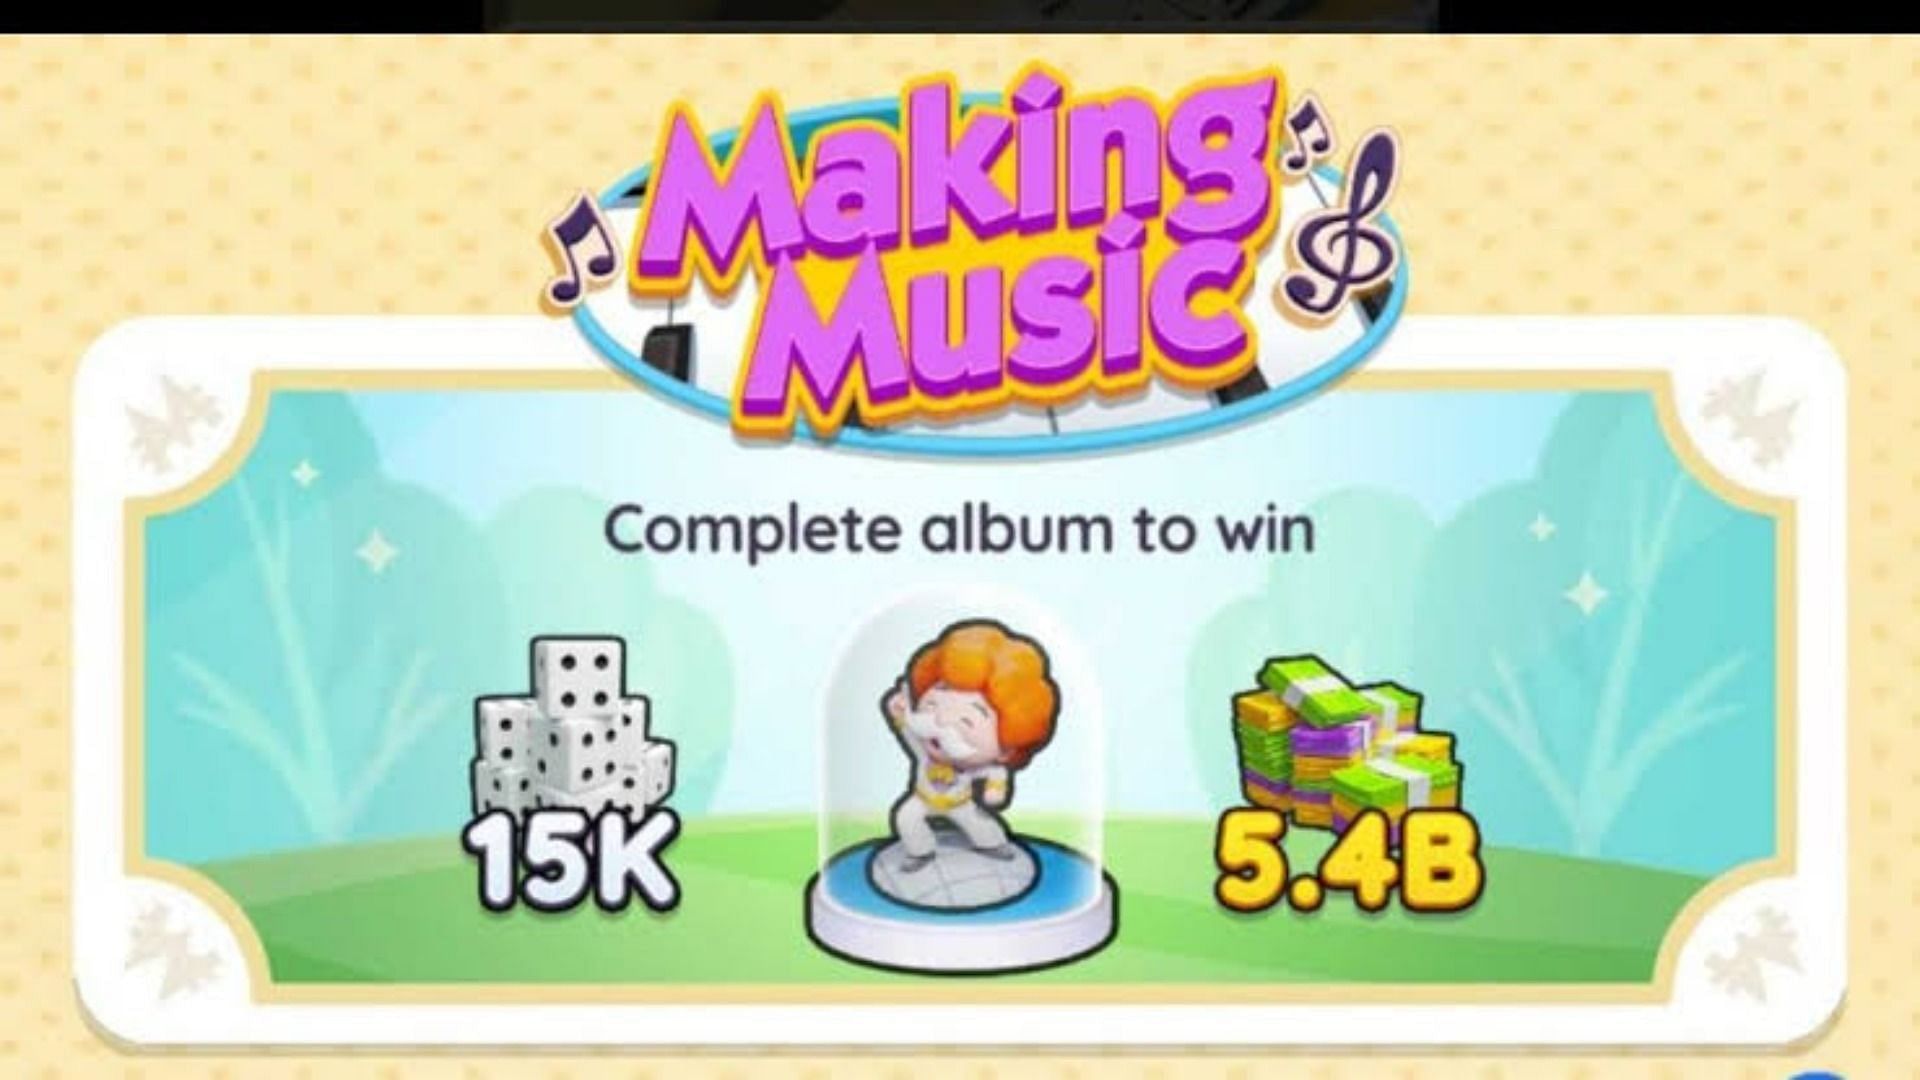 Making Music is the current season in Monopoly Go (Image via Scopely)